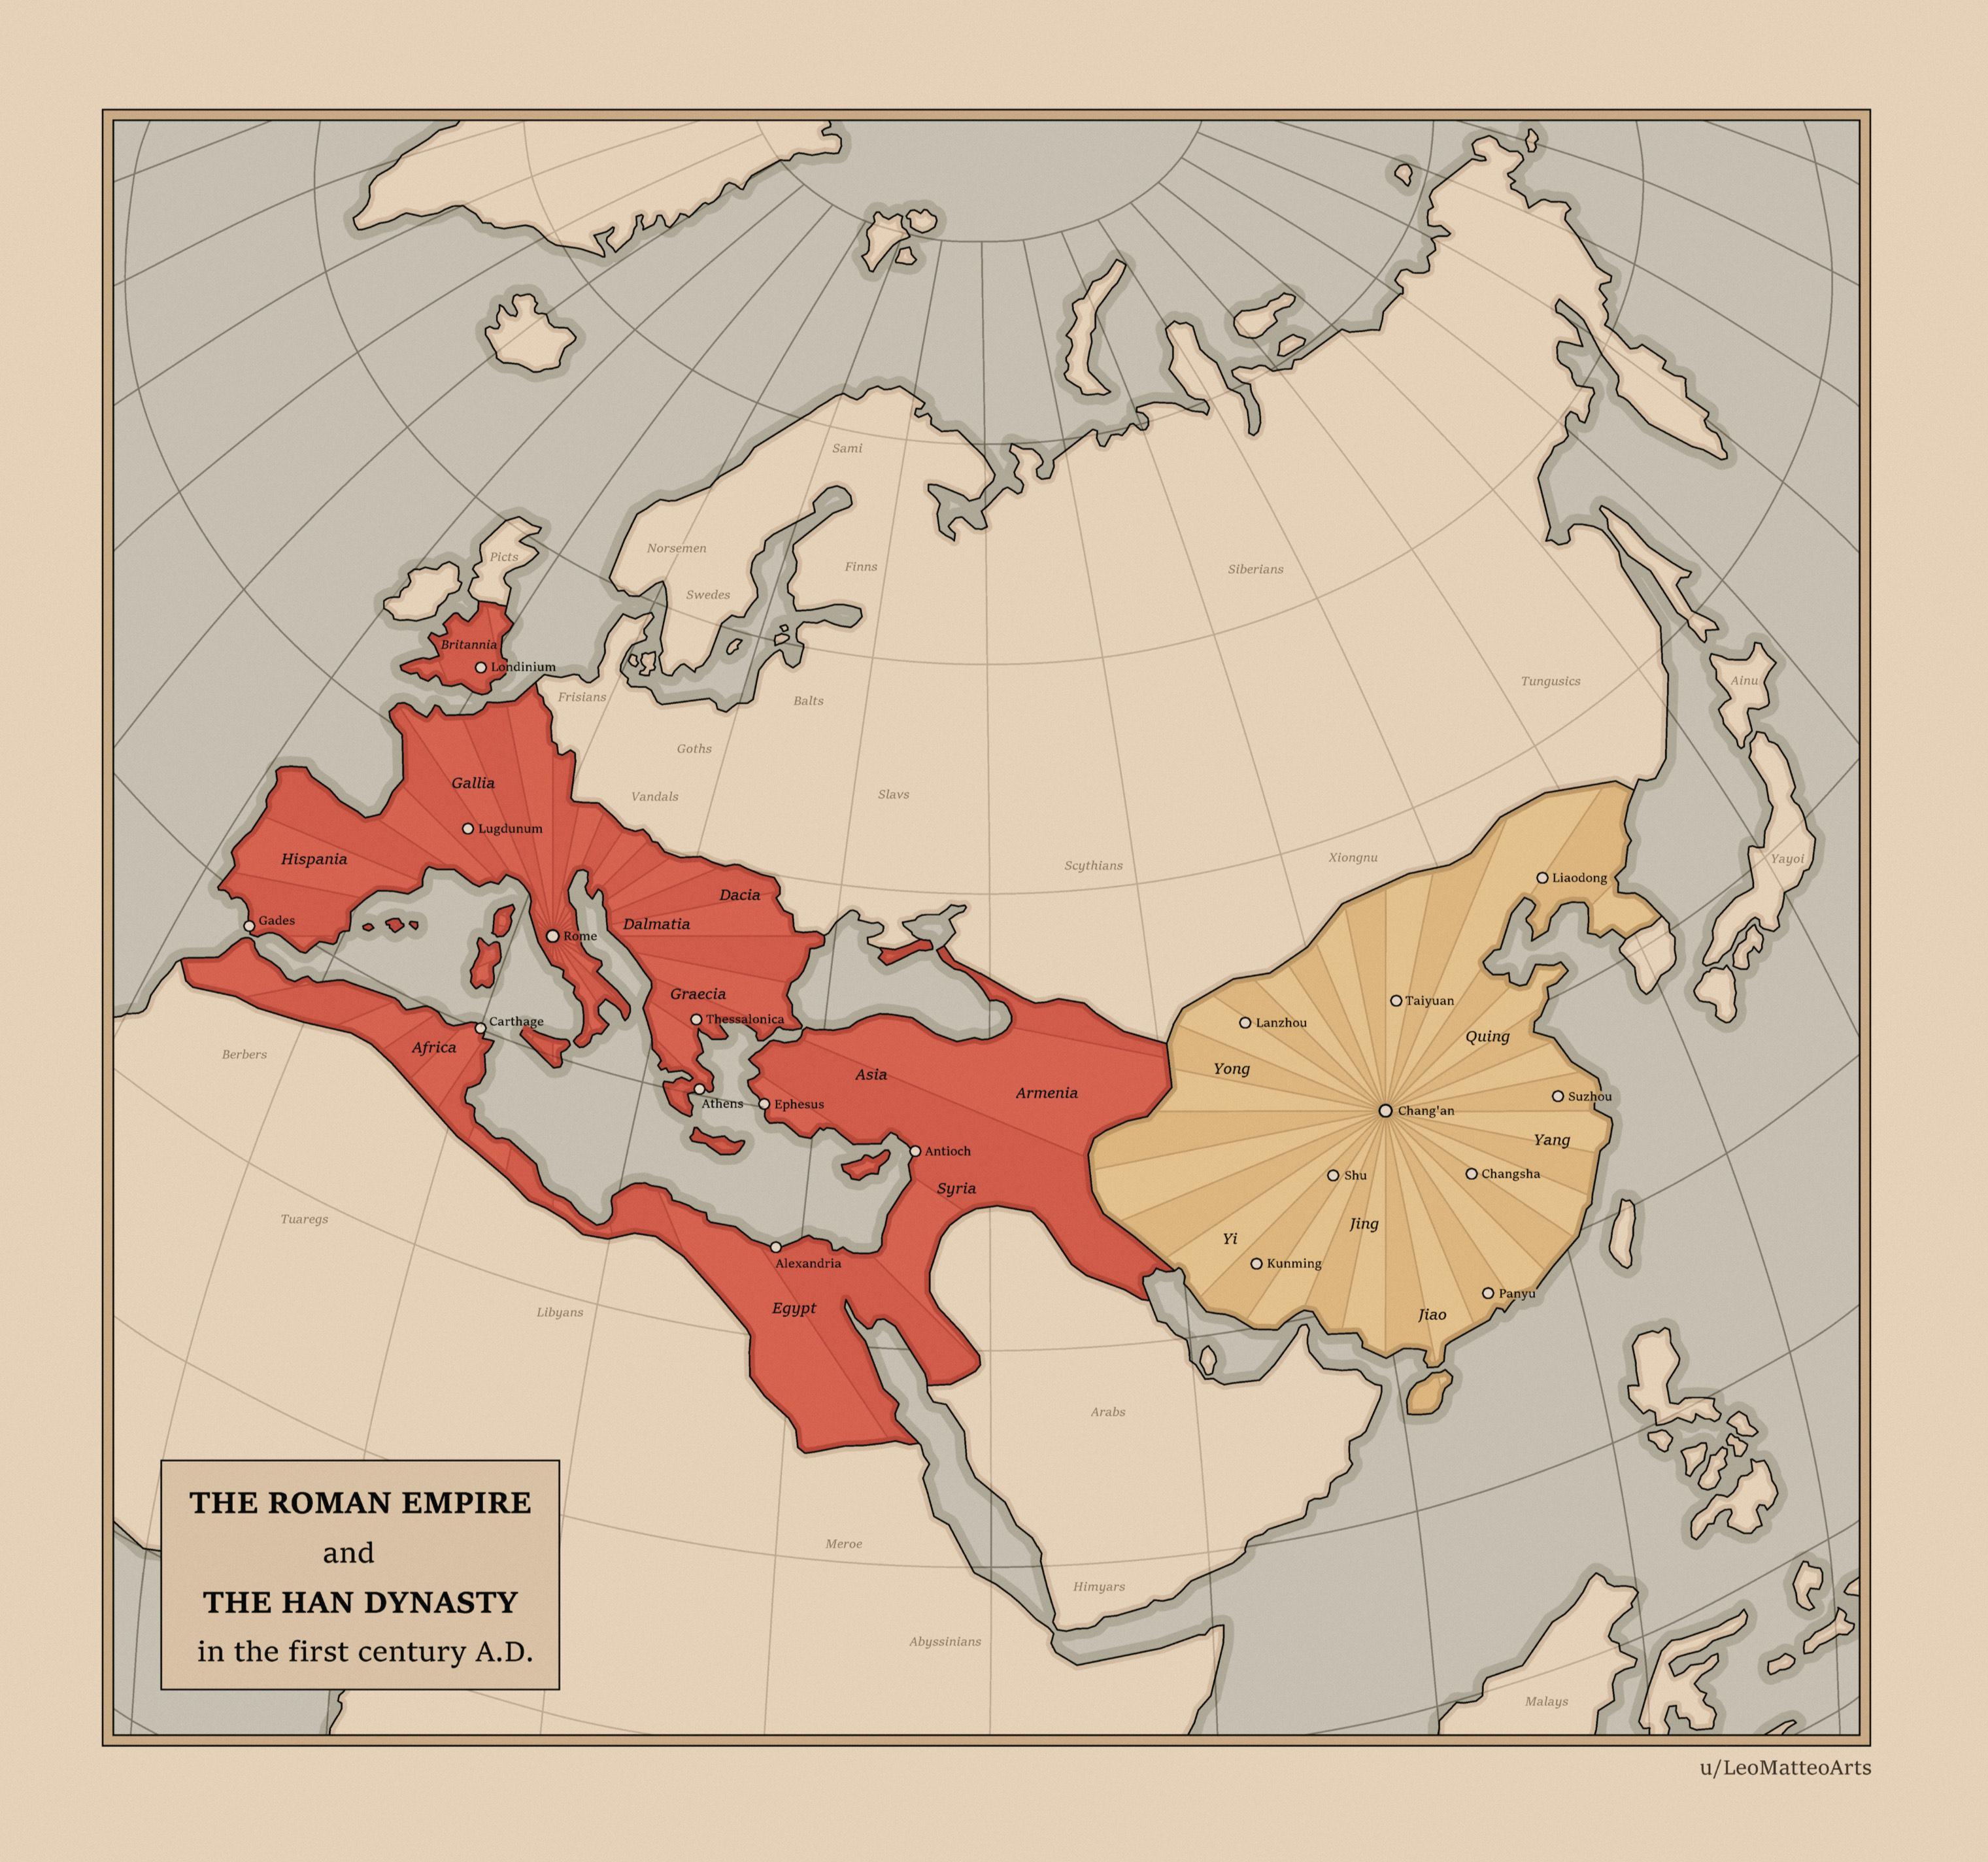 How Were The Han Dynasty And Roman Empire Similar?